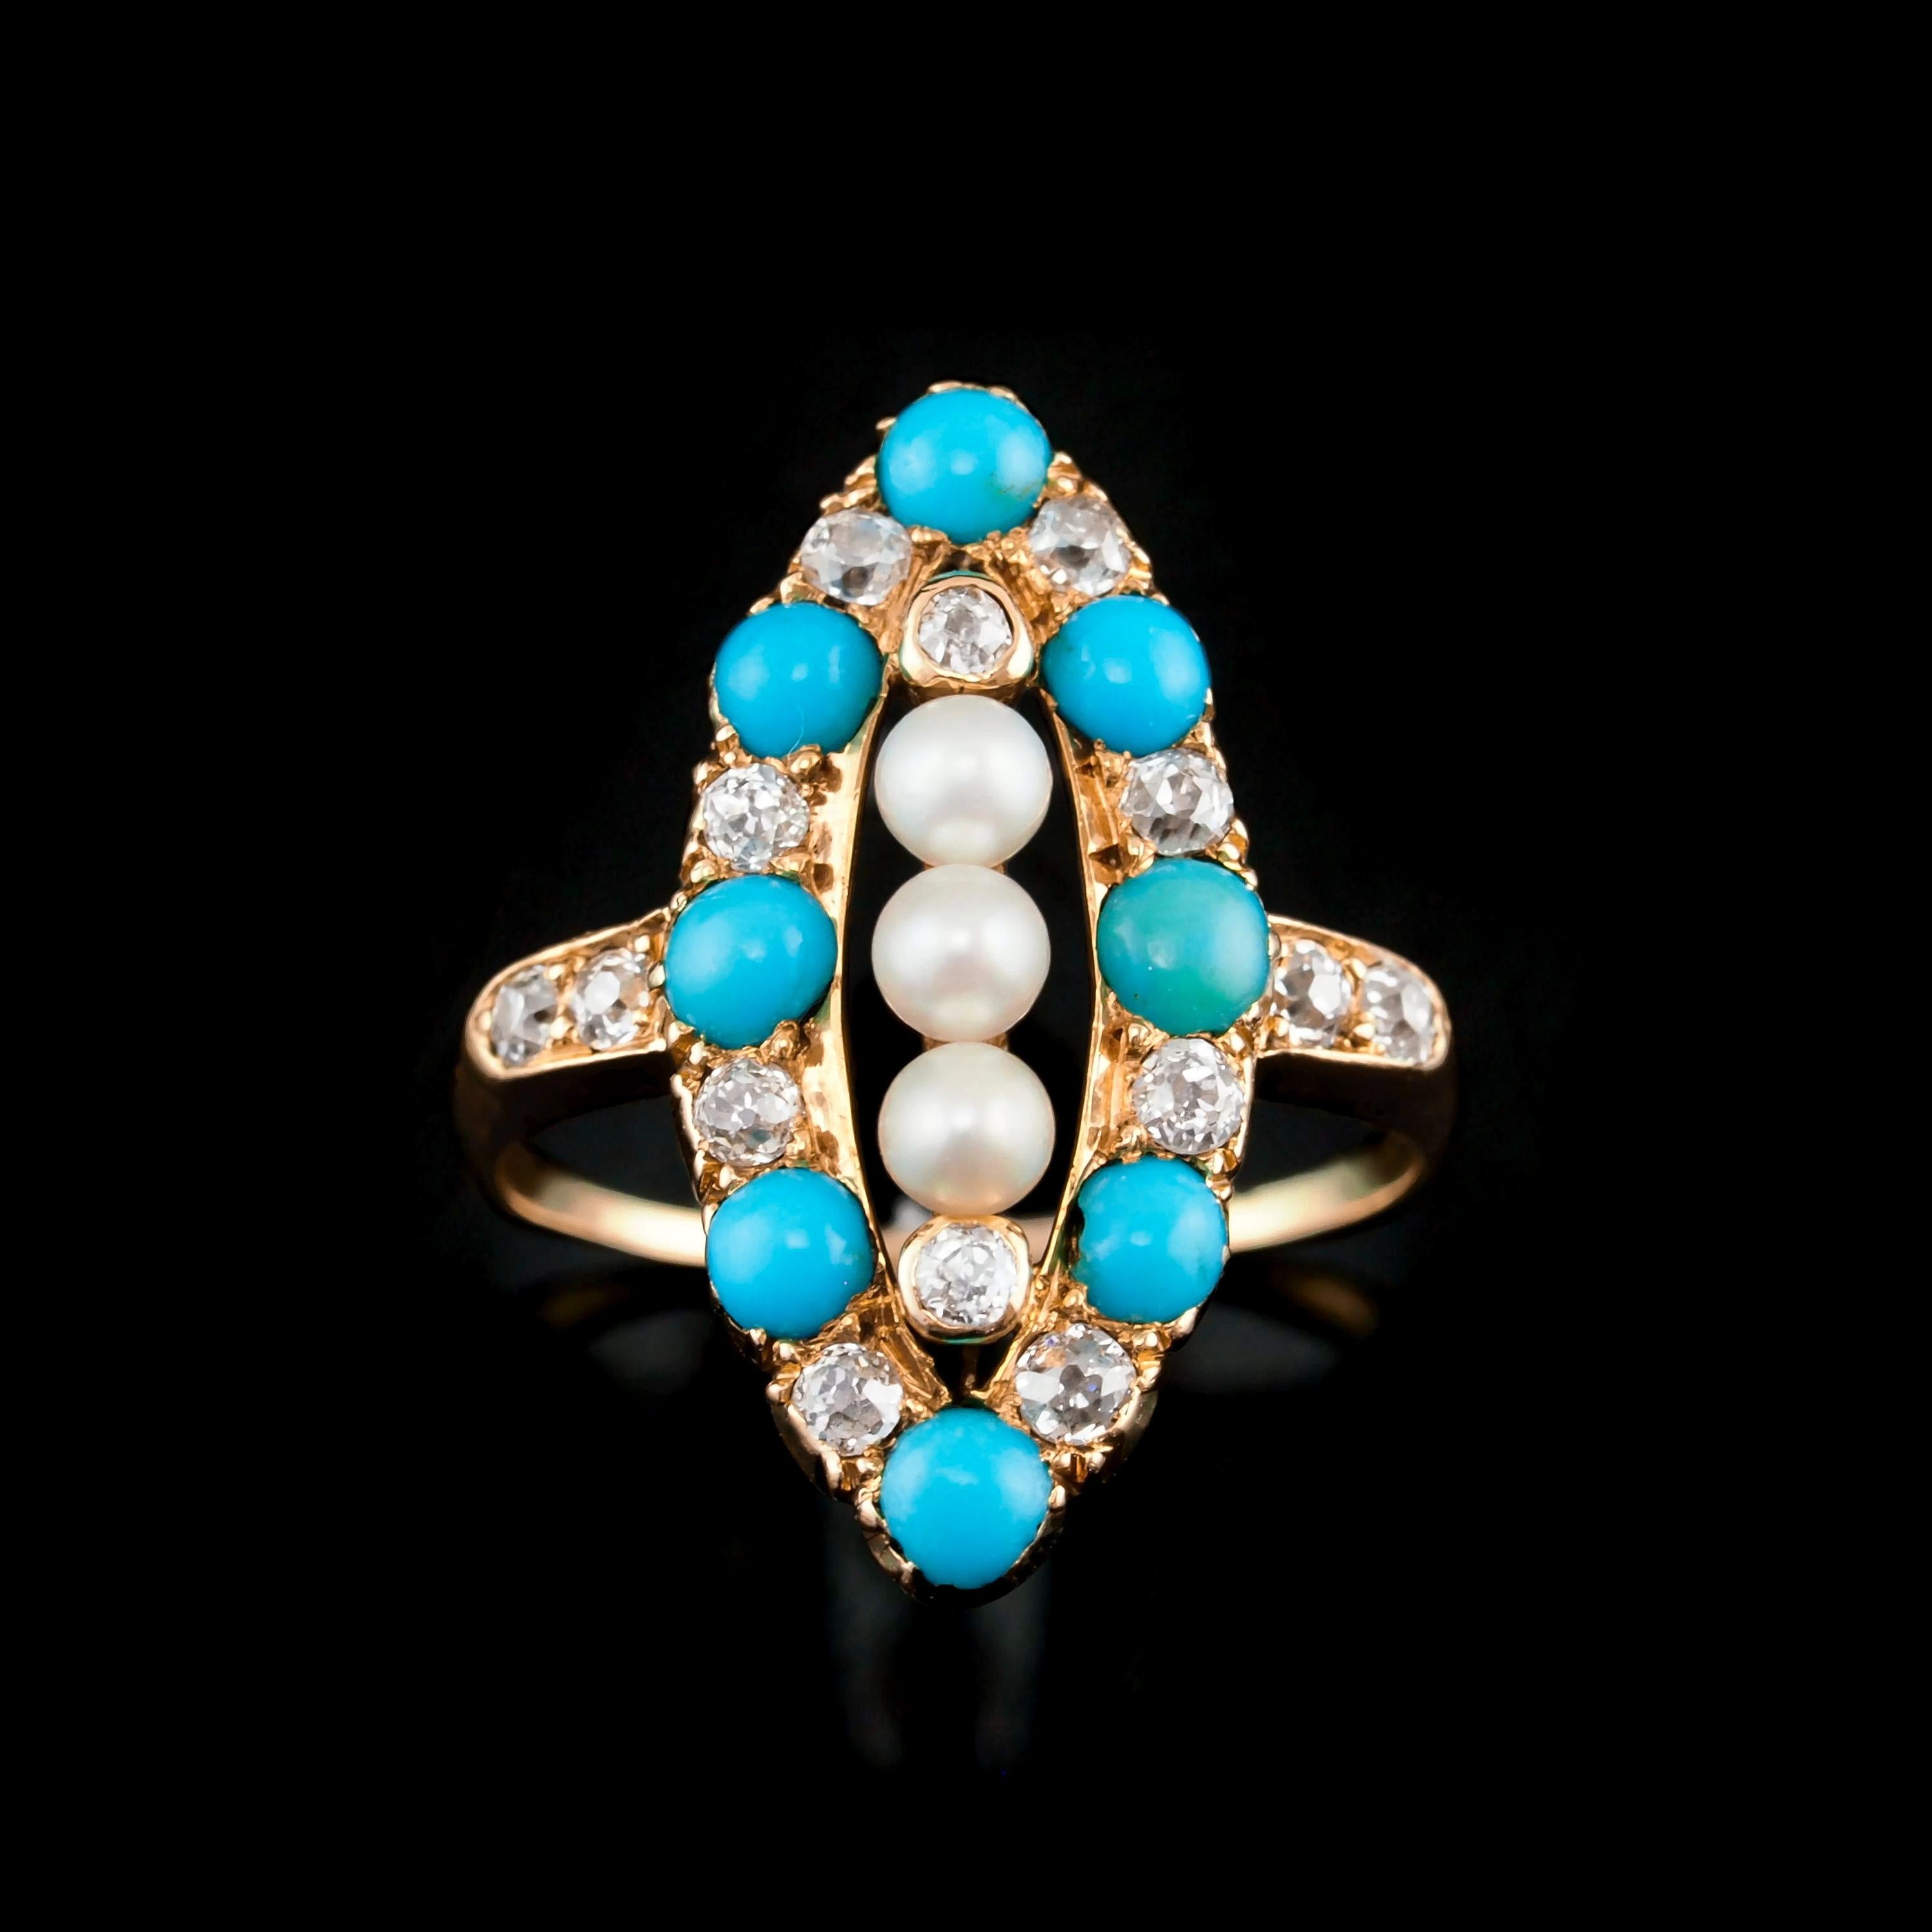 Antique Victorian Diamond Pearl Turquoise 18K Gold Ring Navette/Marquise c.1880 For Sale 3